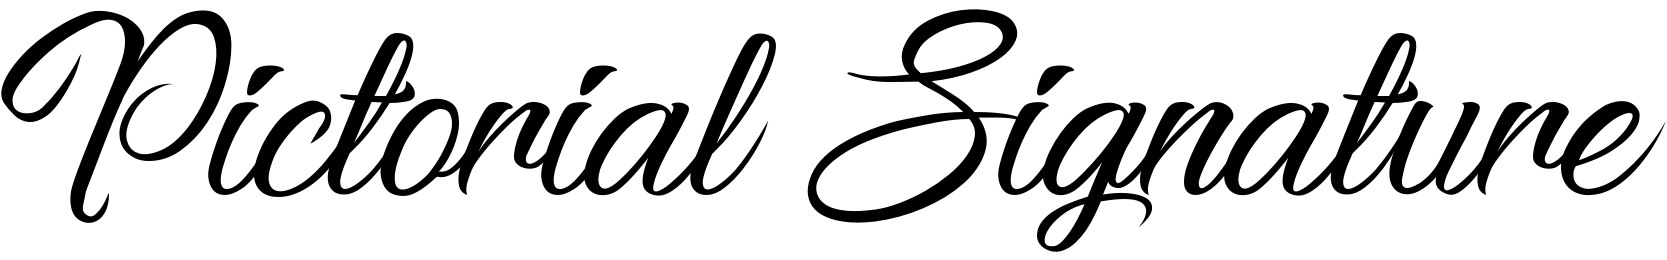 Free Calligraphy fonts.